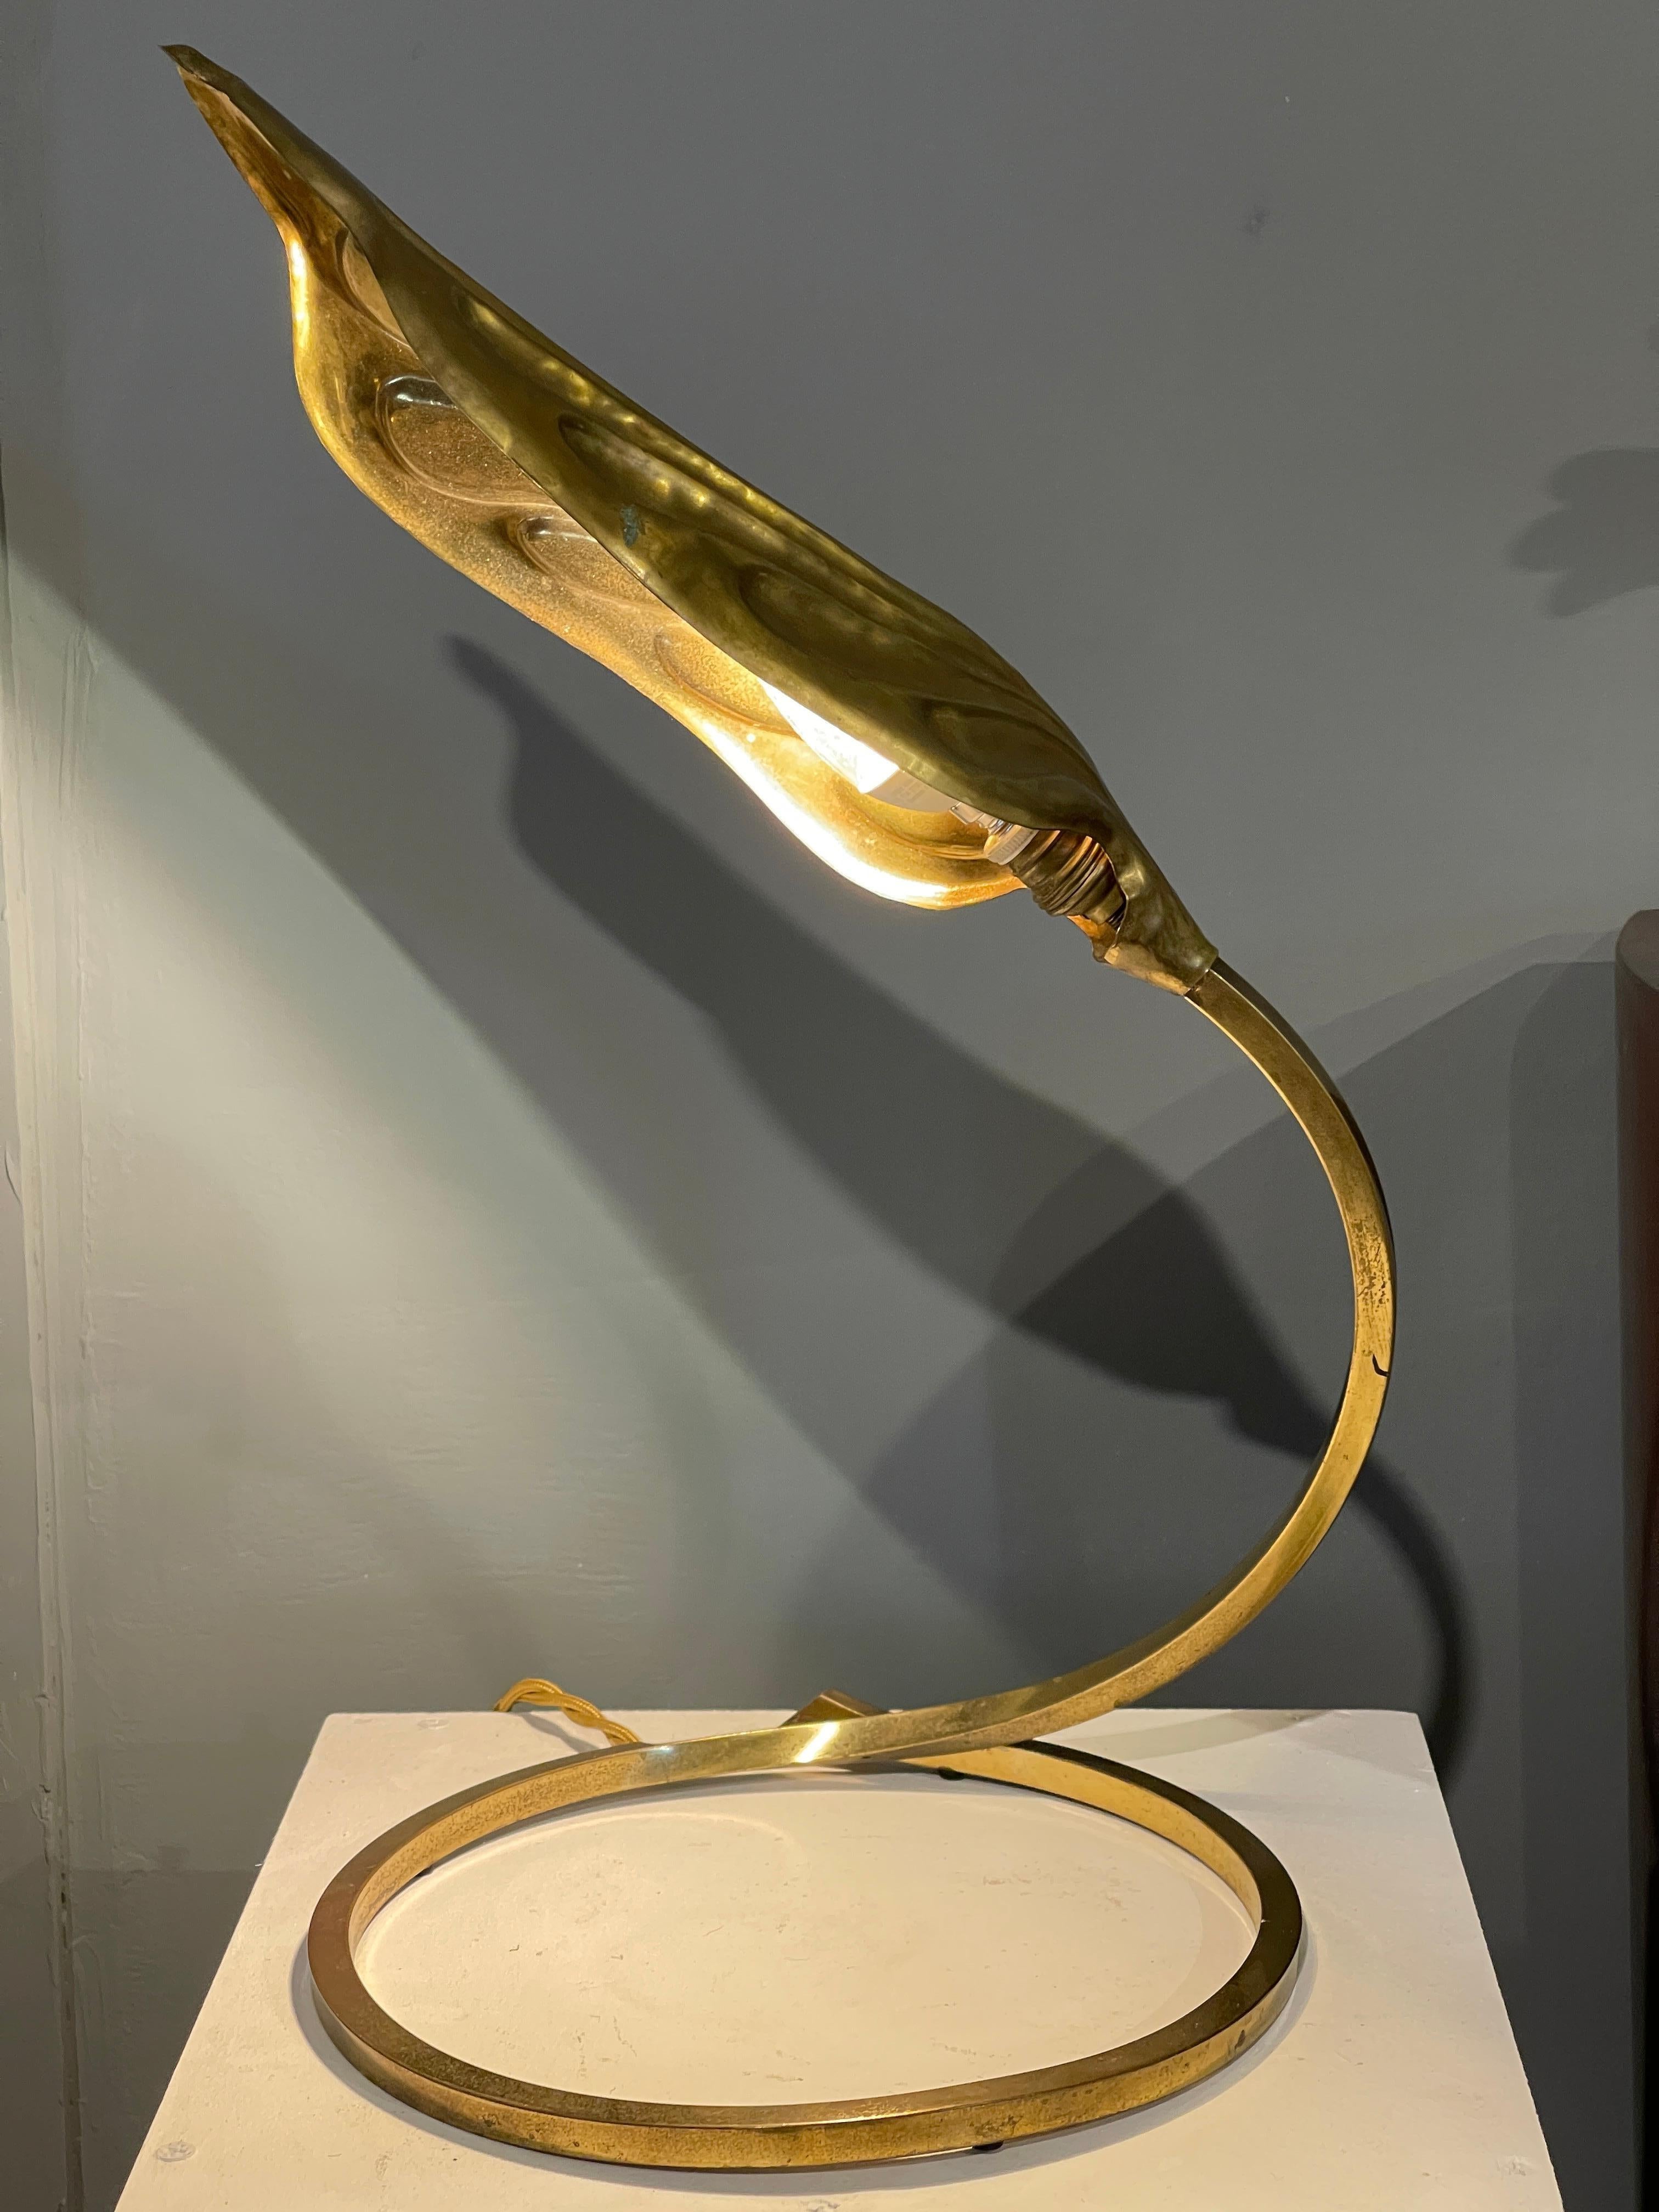 Brass lamp designed by Tommaso Barbi, depicting a leaf, Italian production of the 70s.